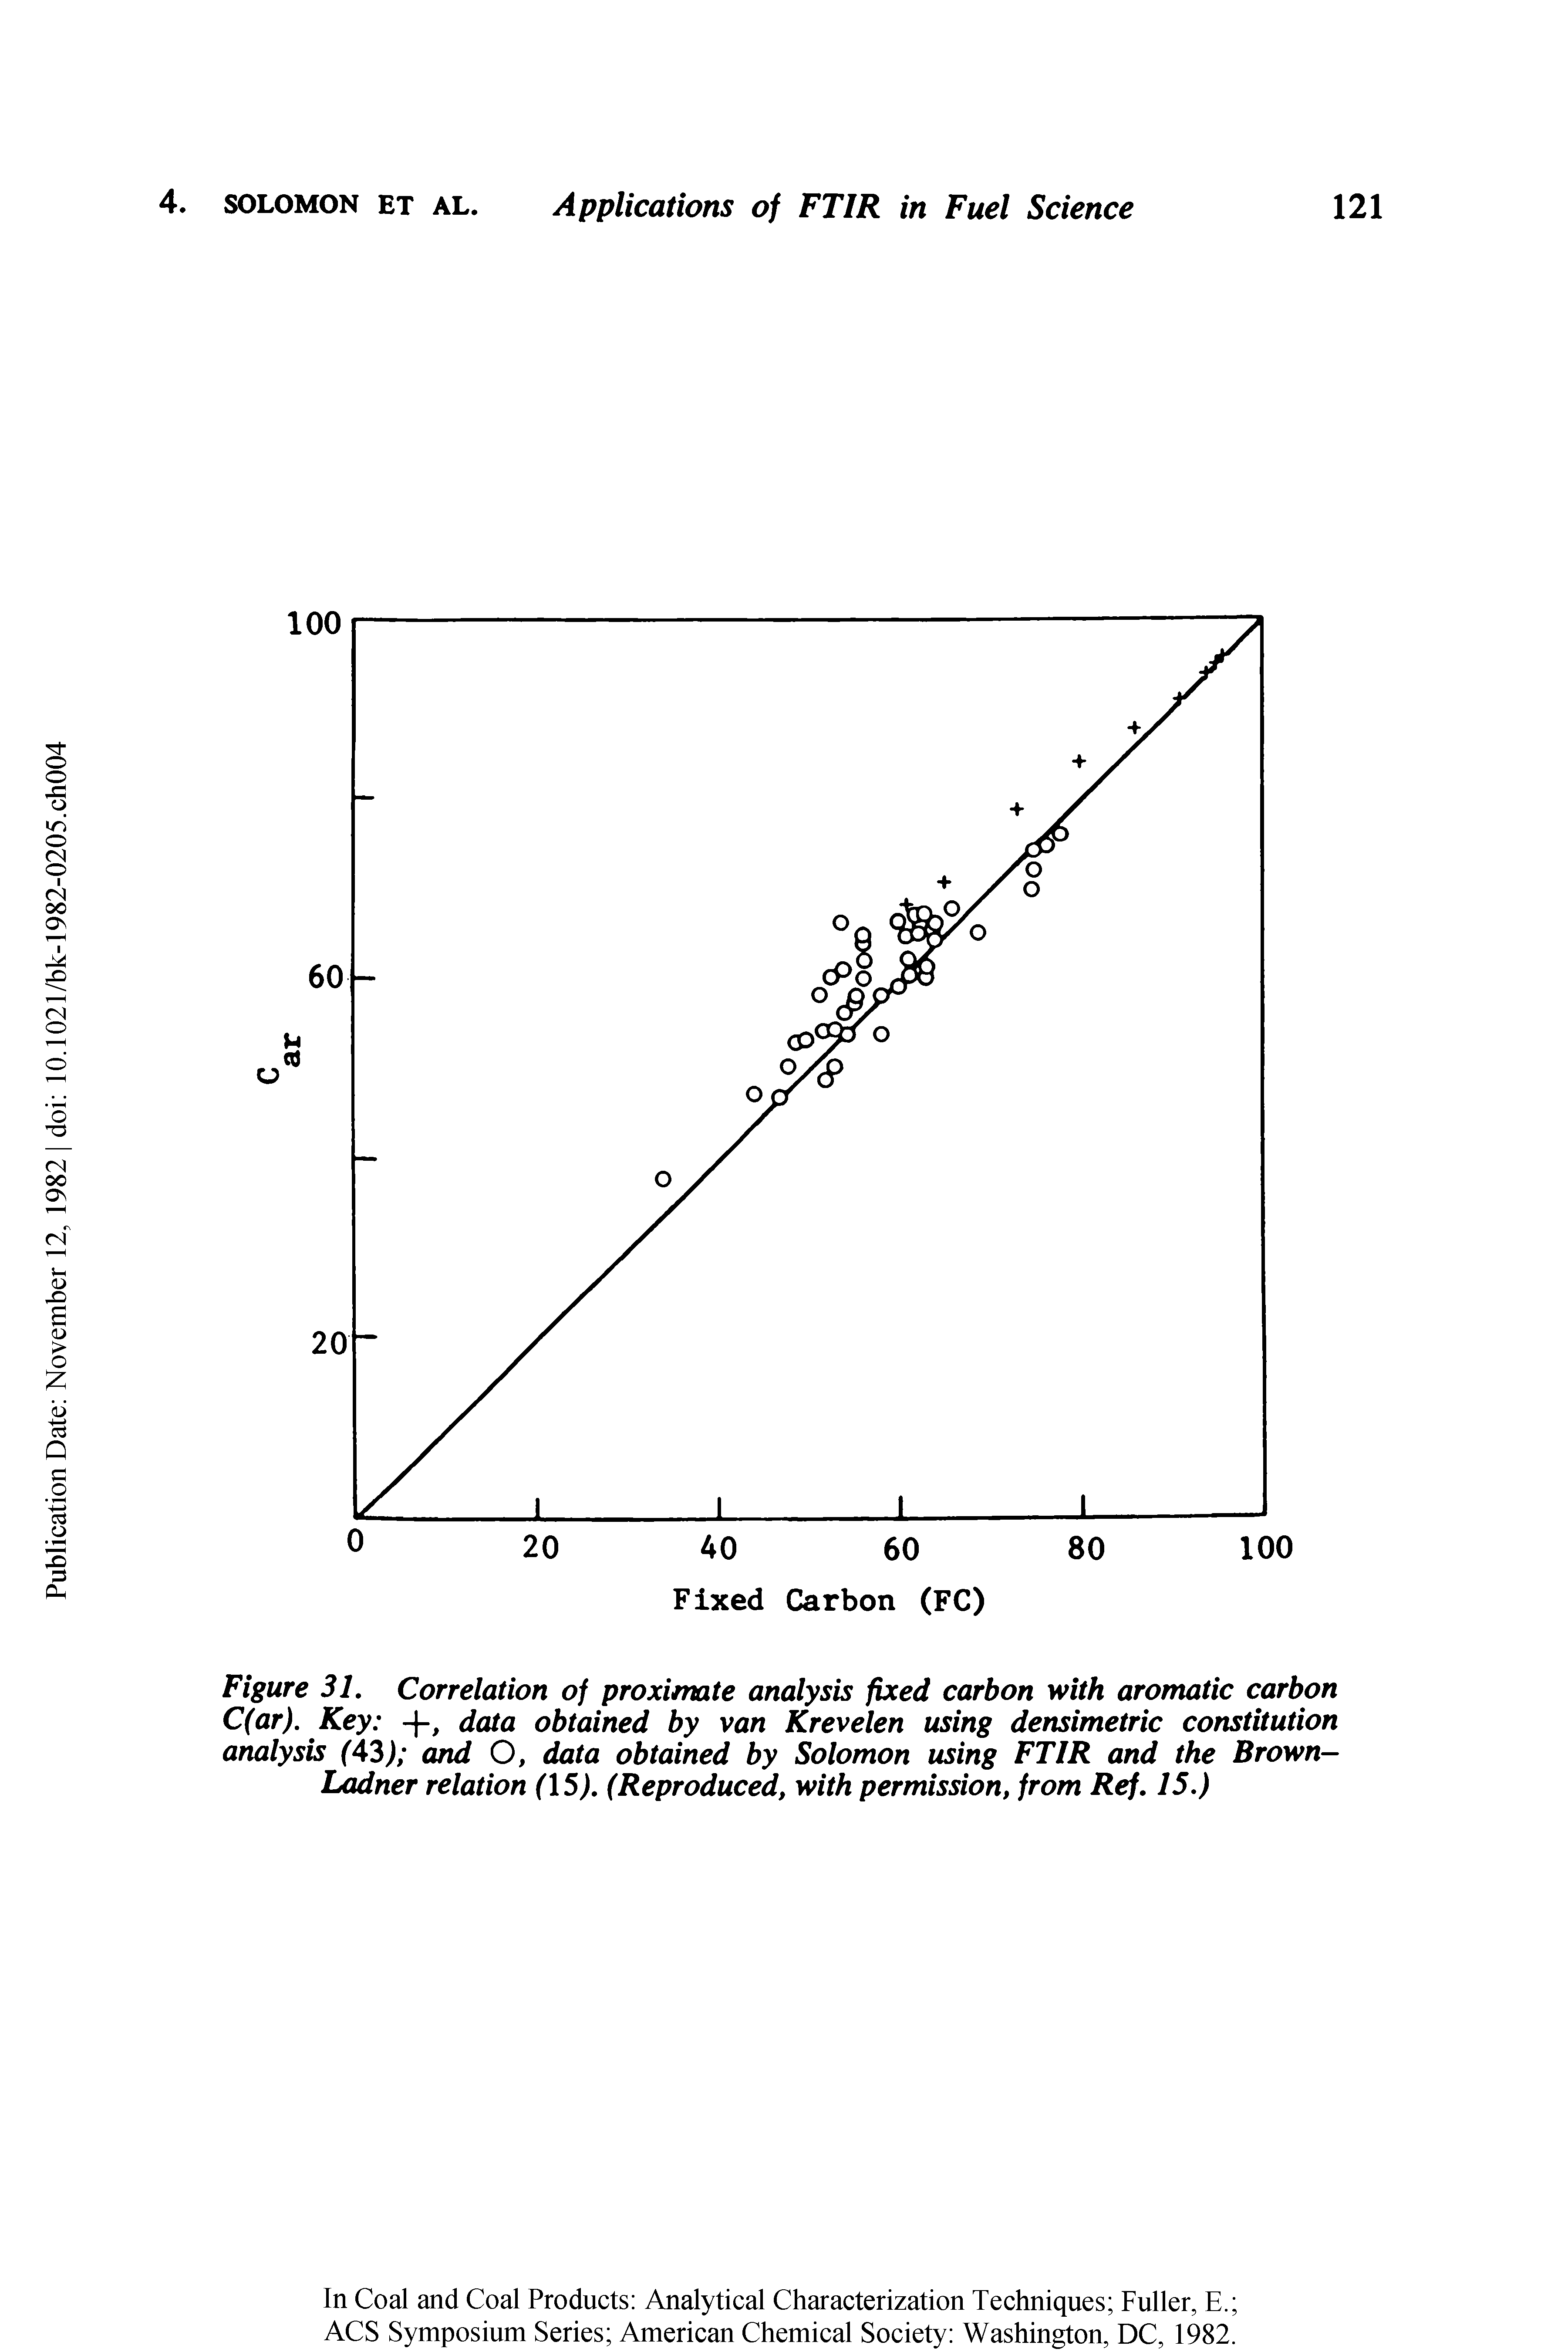 Figure 31. Correlation of proximate analysis fixed carbon with aromatic carbon C(ar). Key +, data obtained by van Krevelen using densimetric constitution analysis (43) and O, data obtained by Solomon using FTIR and the Brown-Ladner relation (15). (Reproduced, with permission, from Ref. 15.)...